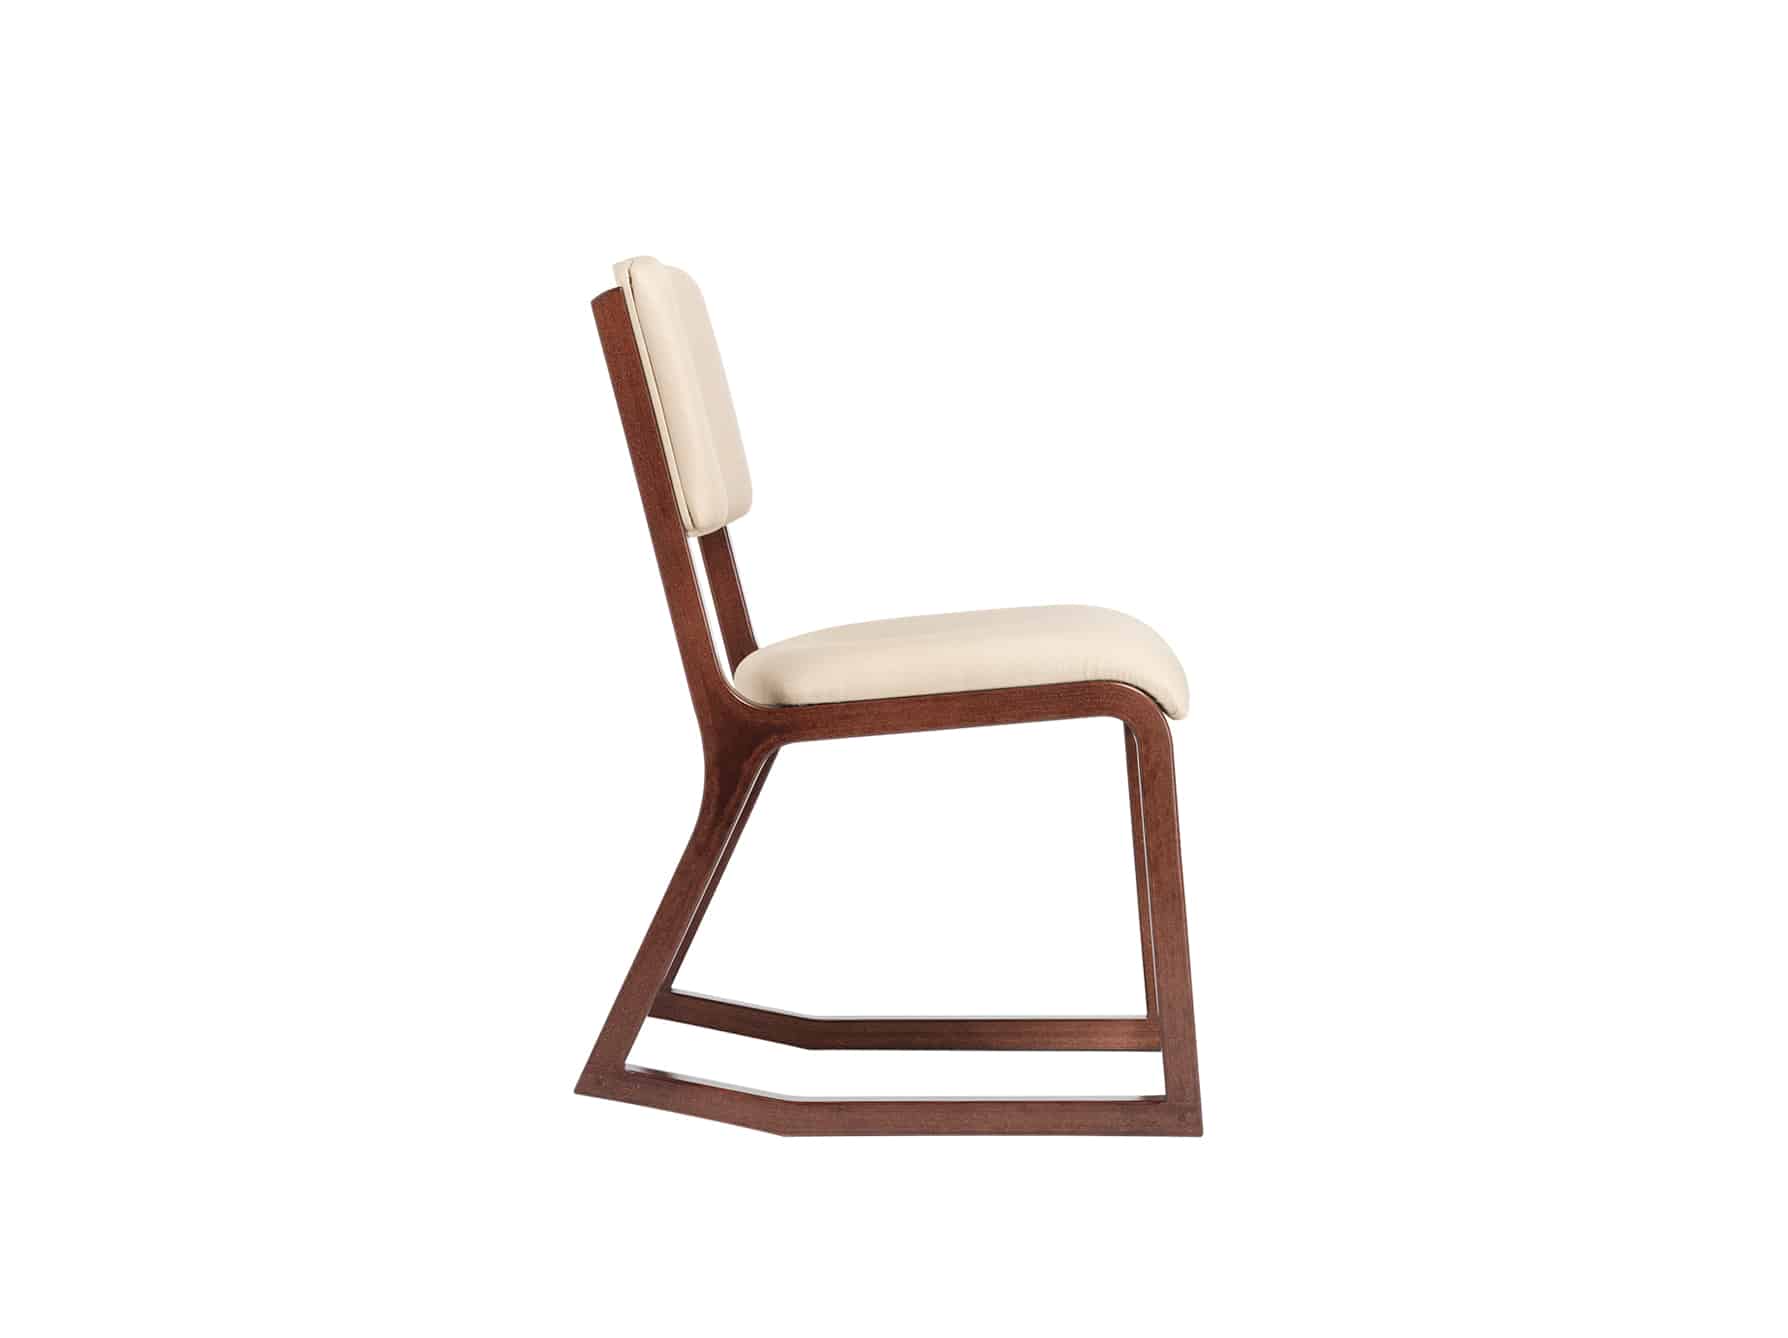 PlyWedge, 2 Position Chair, Upholstered Seat